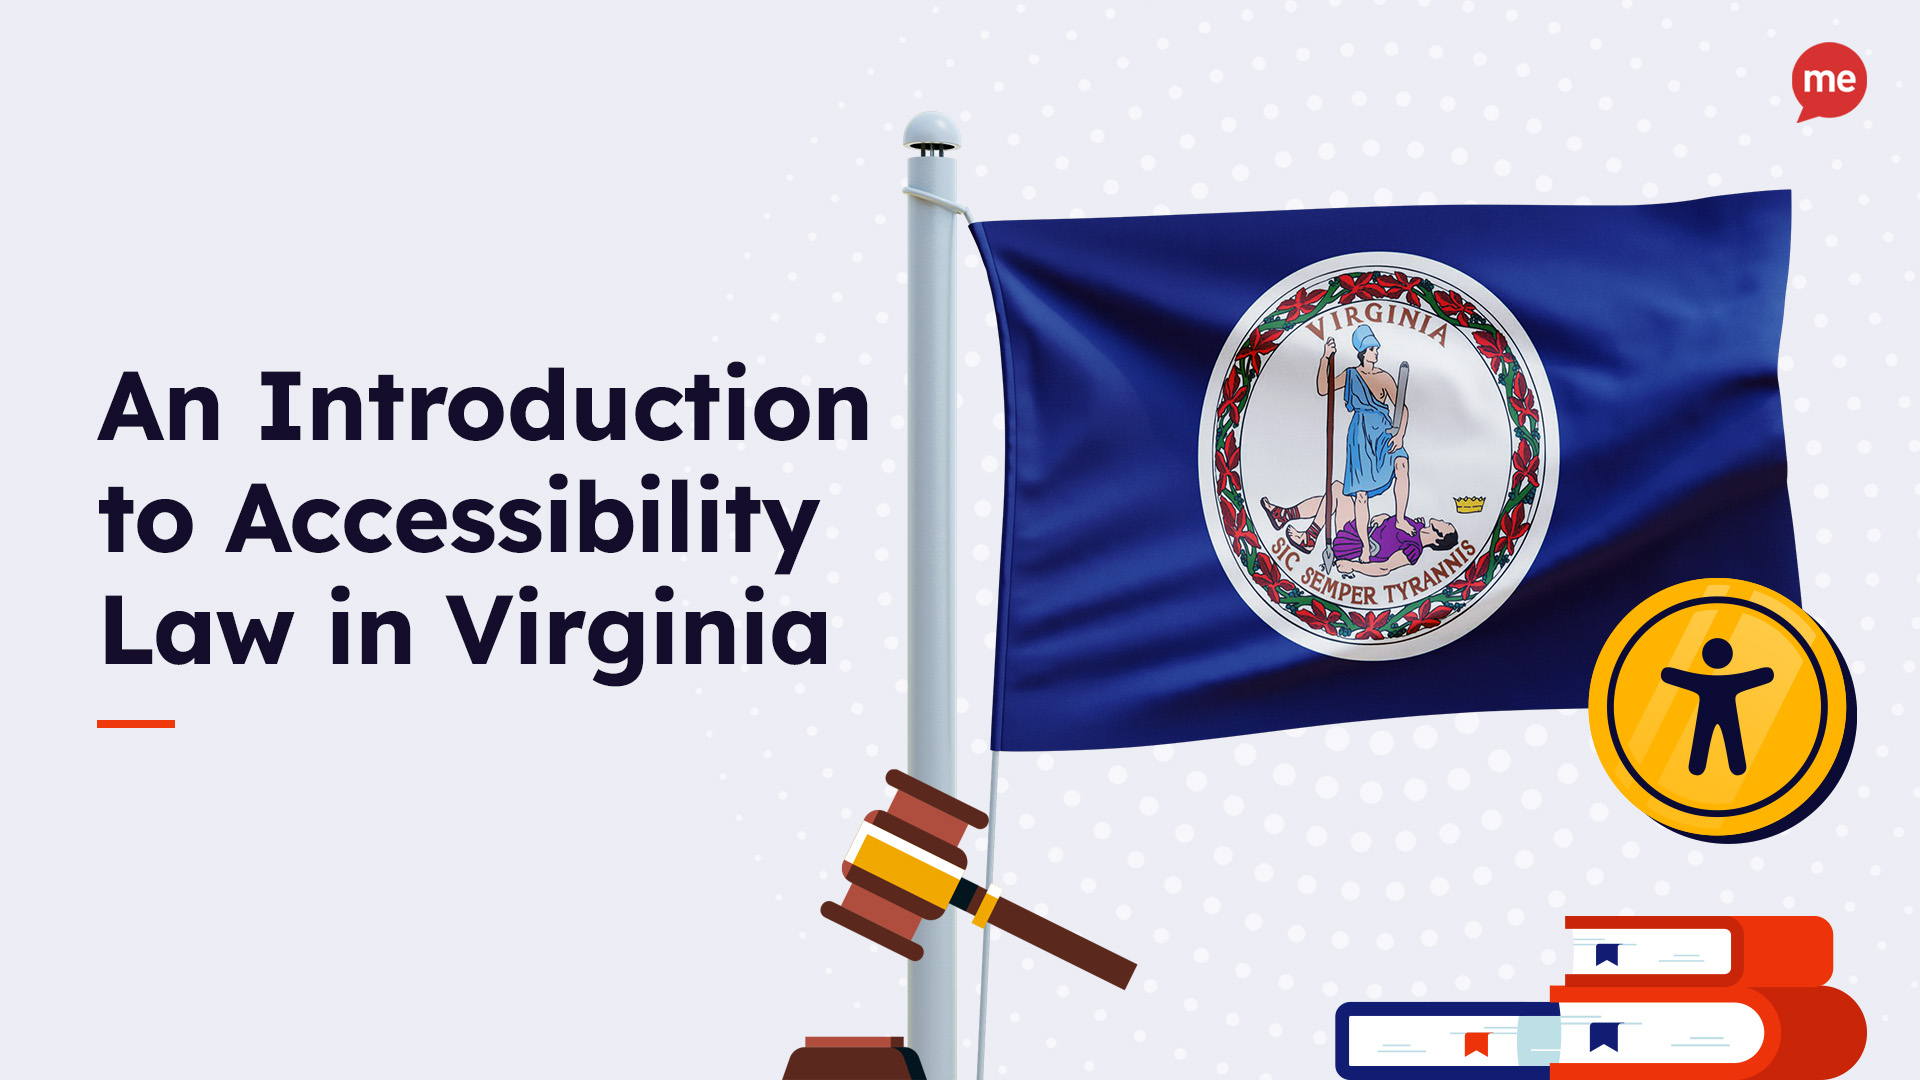 An Introduction to Accessibility Law in Virginia